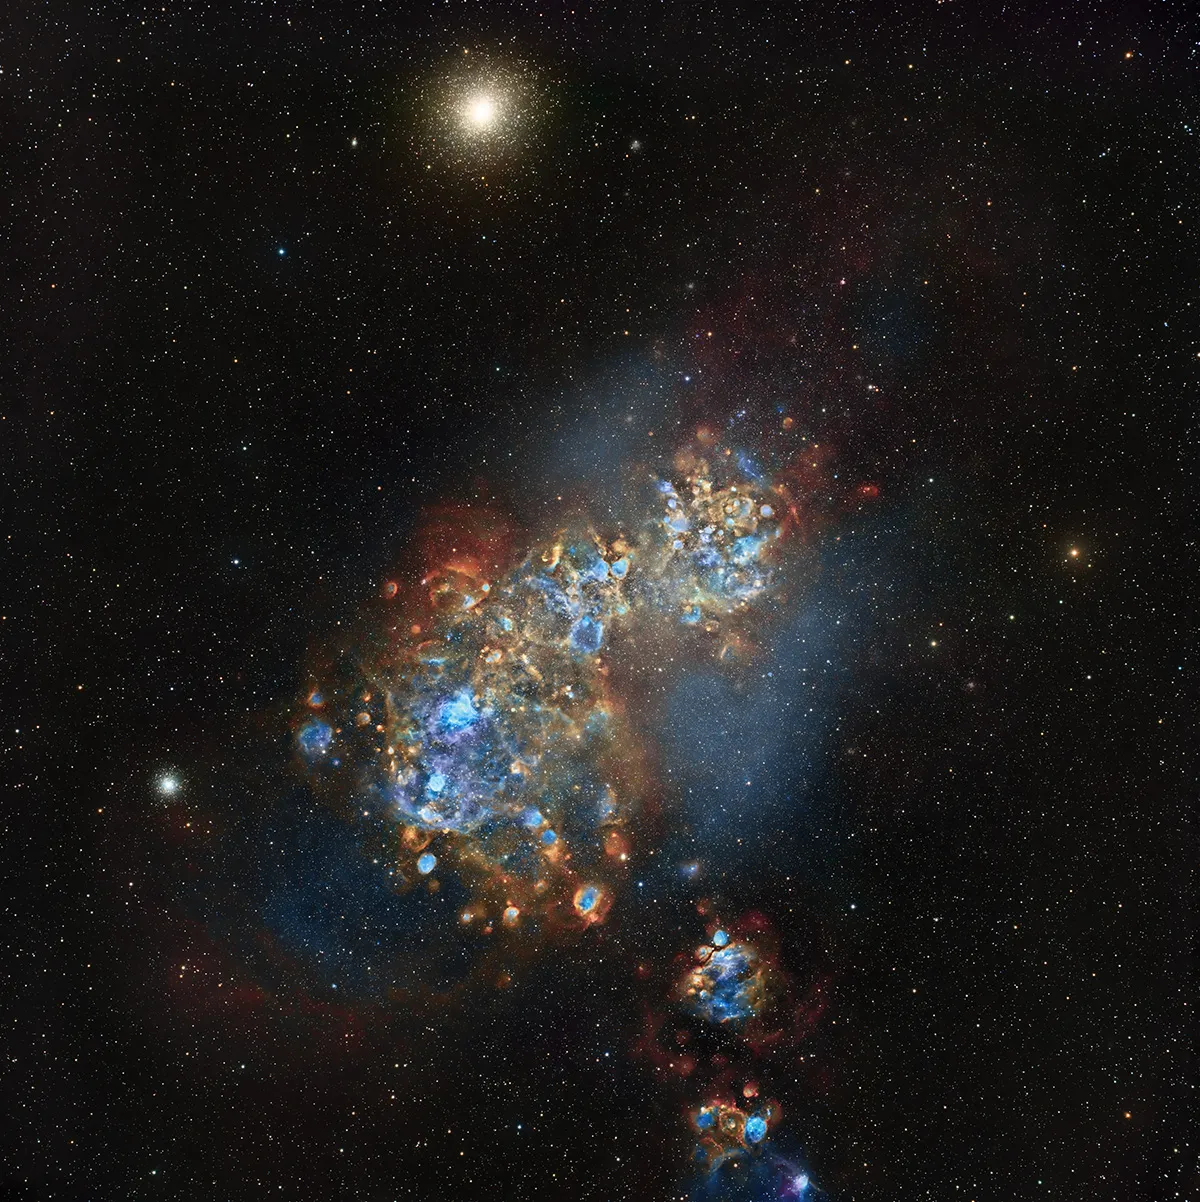 Nebulae of the Small Magellanic Cloud, by Jonathan Lodge, Heaven's Mirror Observatory, Yass Valley, New South Wales, Australia. Category: Galaxies Equipment: Takahashi FSQ-106ED telescope (with 0.73 x focal reducer), Astrodon SHOLRGB 2GEN filter, Paramount MX  mount, FLI ProLine 16803 camera, 382 mm f/3.6, 29 hours total integration